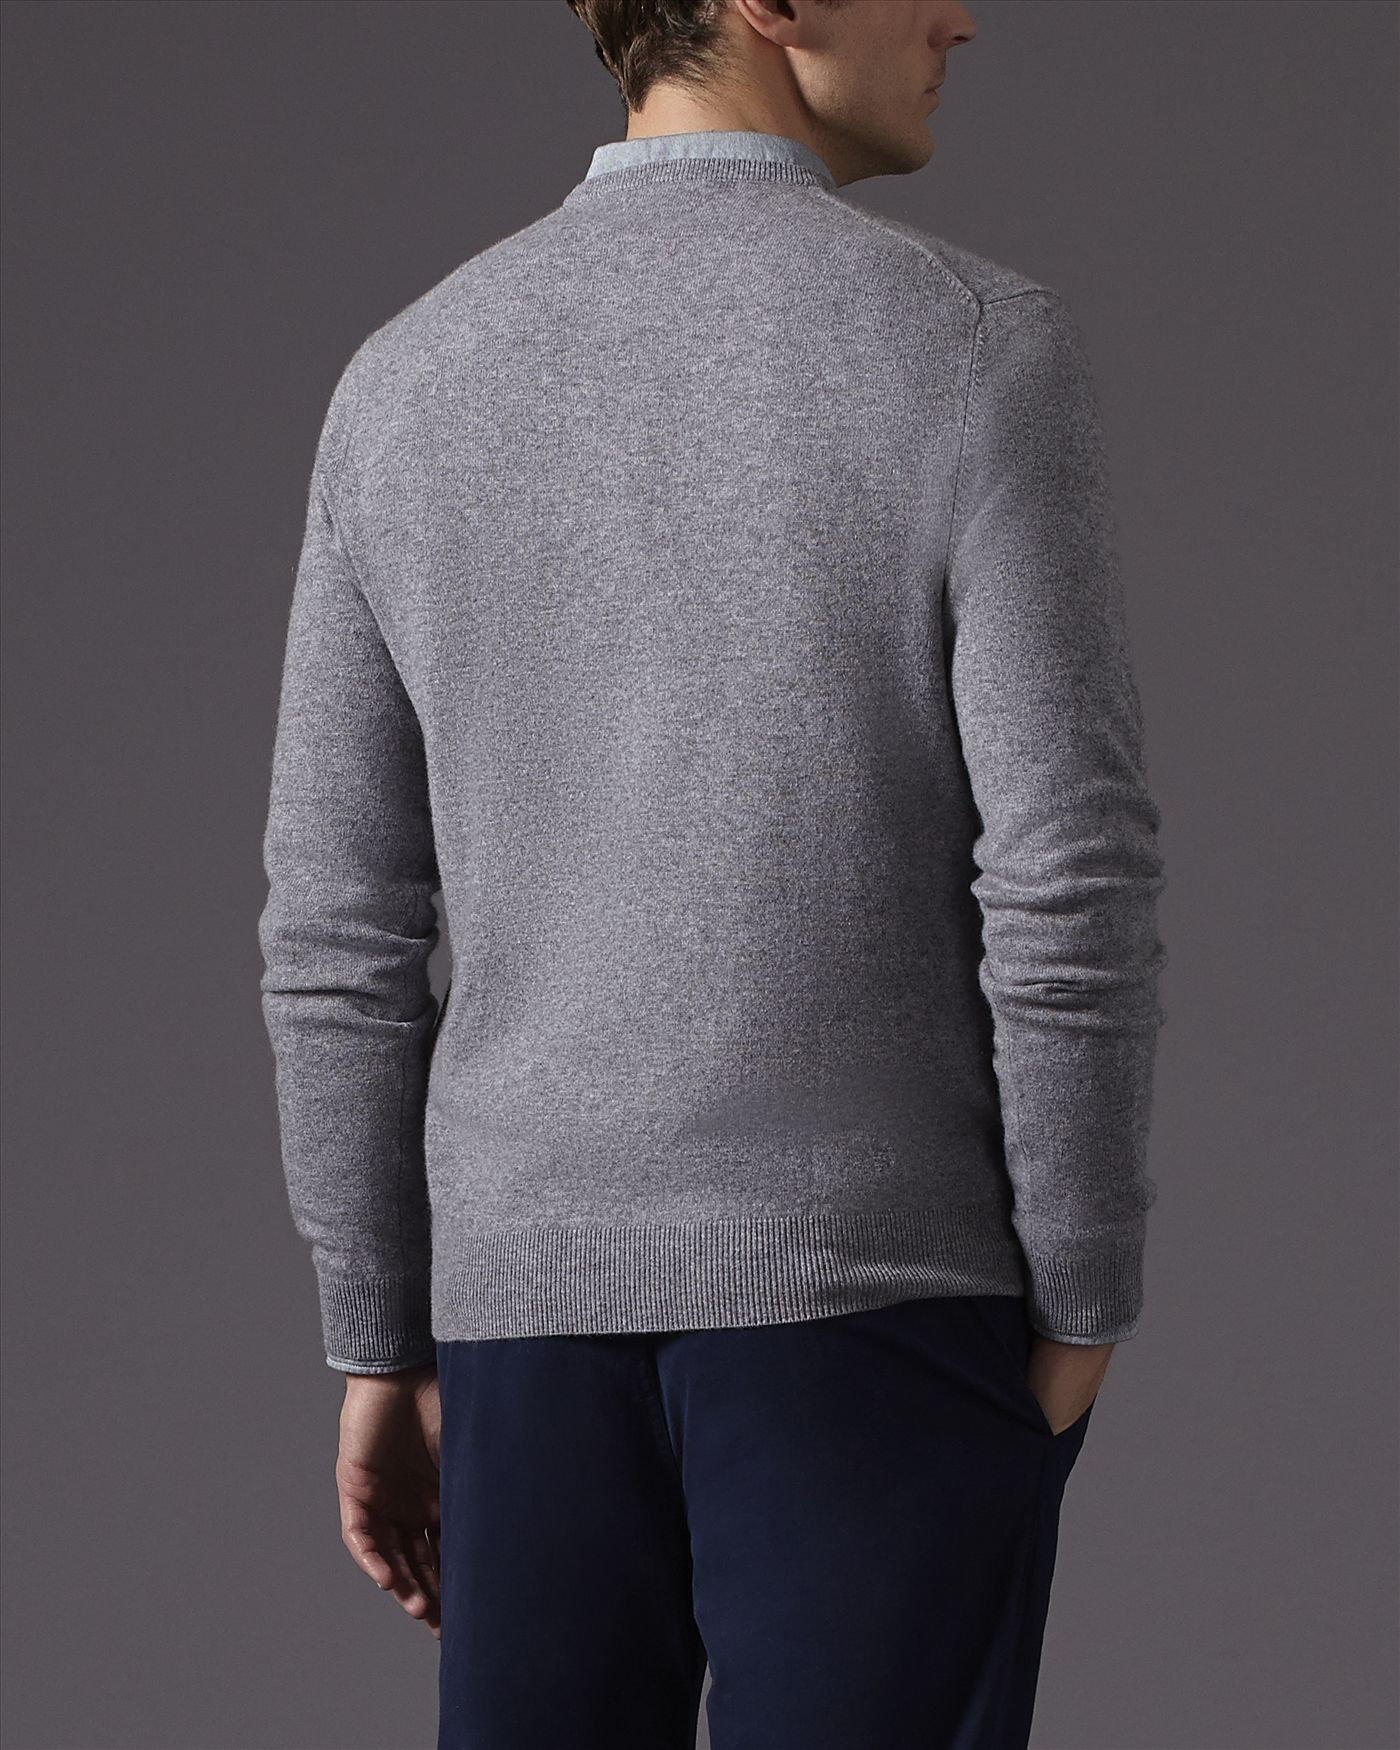 Lyst - Jaeger Cashmere Crew Neck Sweater in Gray for Men